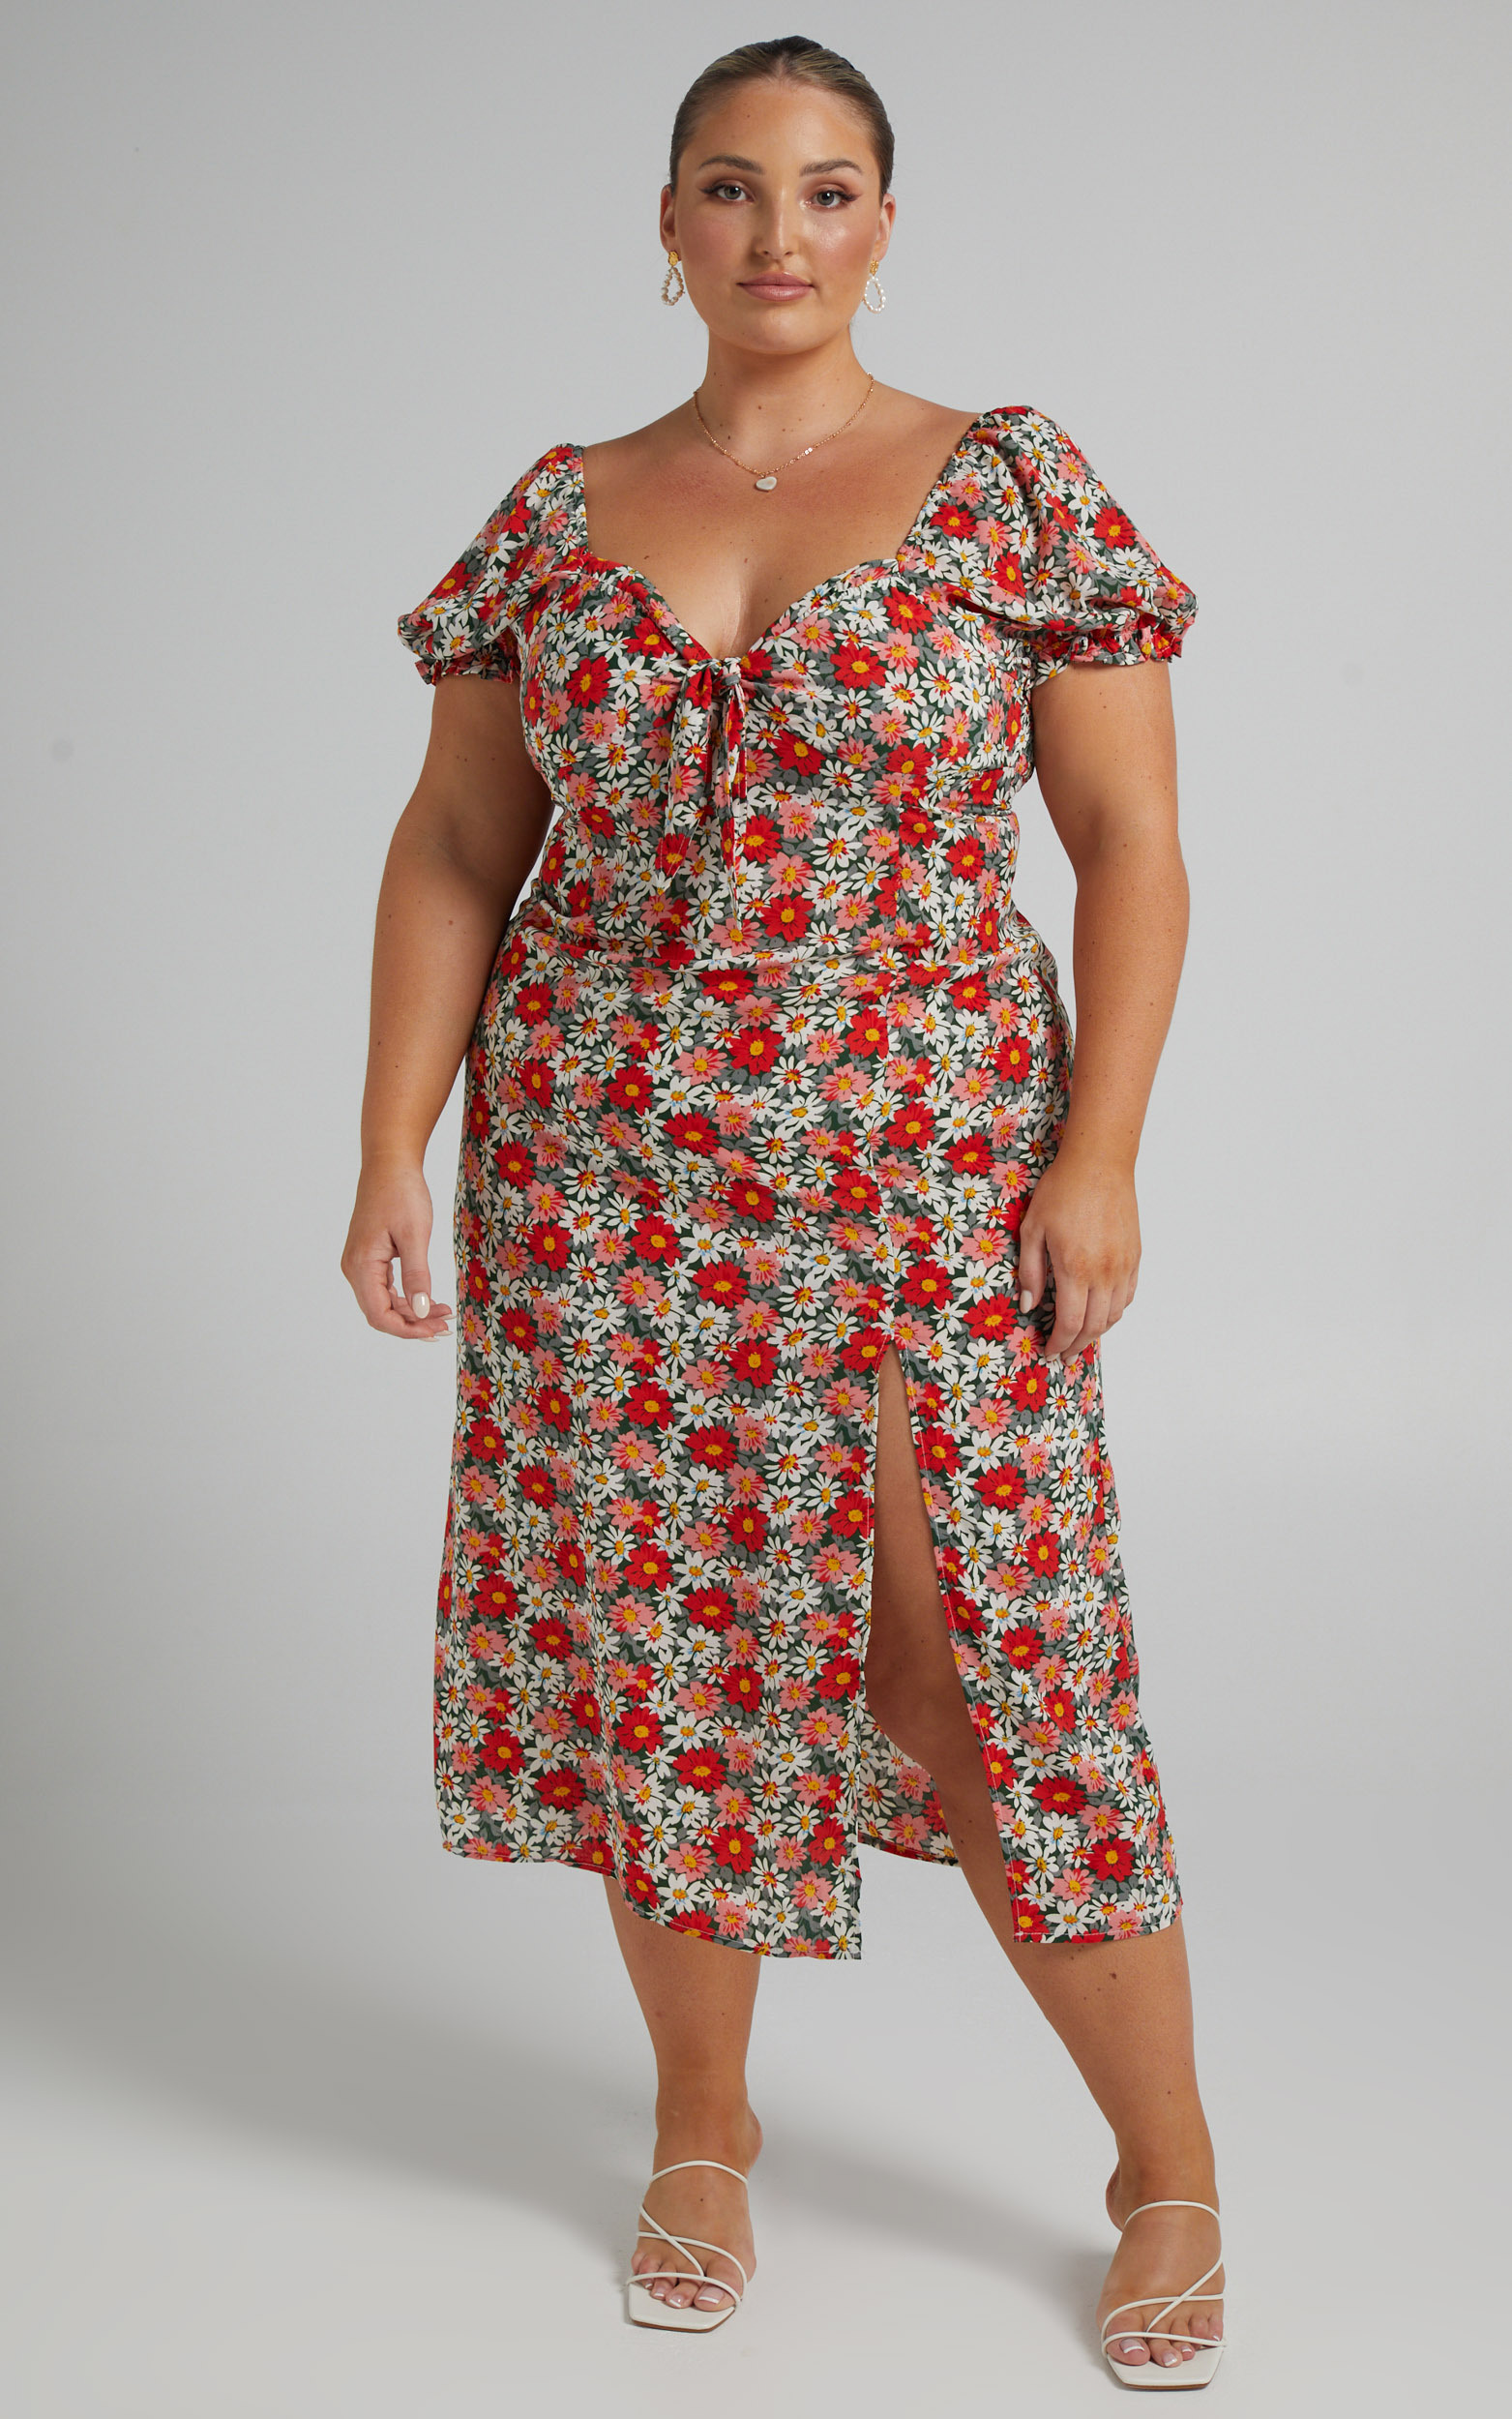 Patty Midi Dress with Front Bust Tie in Navy Floral - 04, NVY1, hi-res image number null